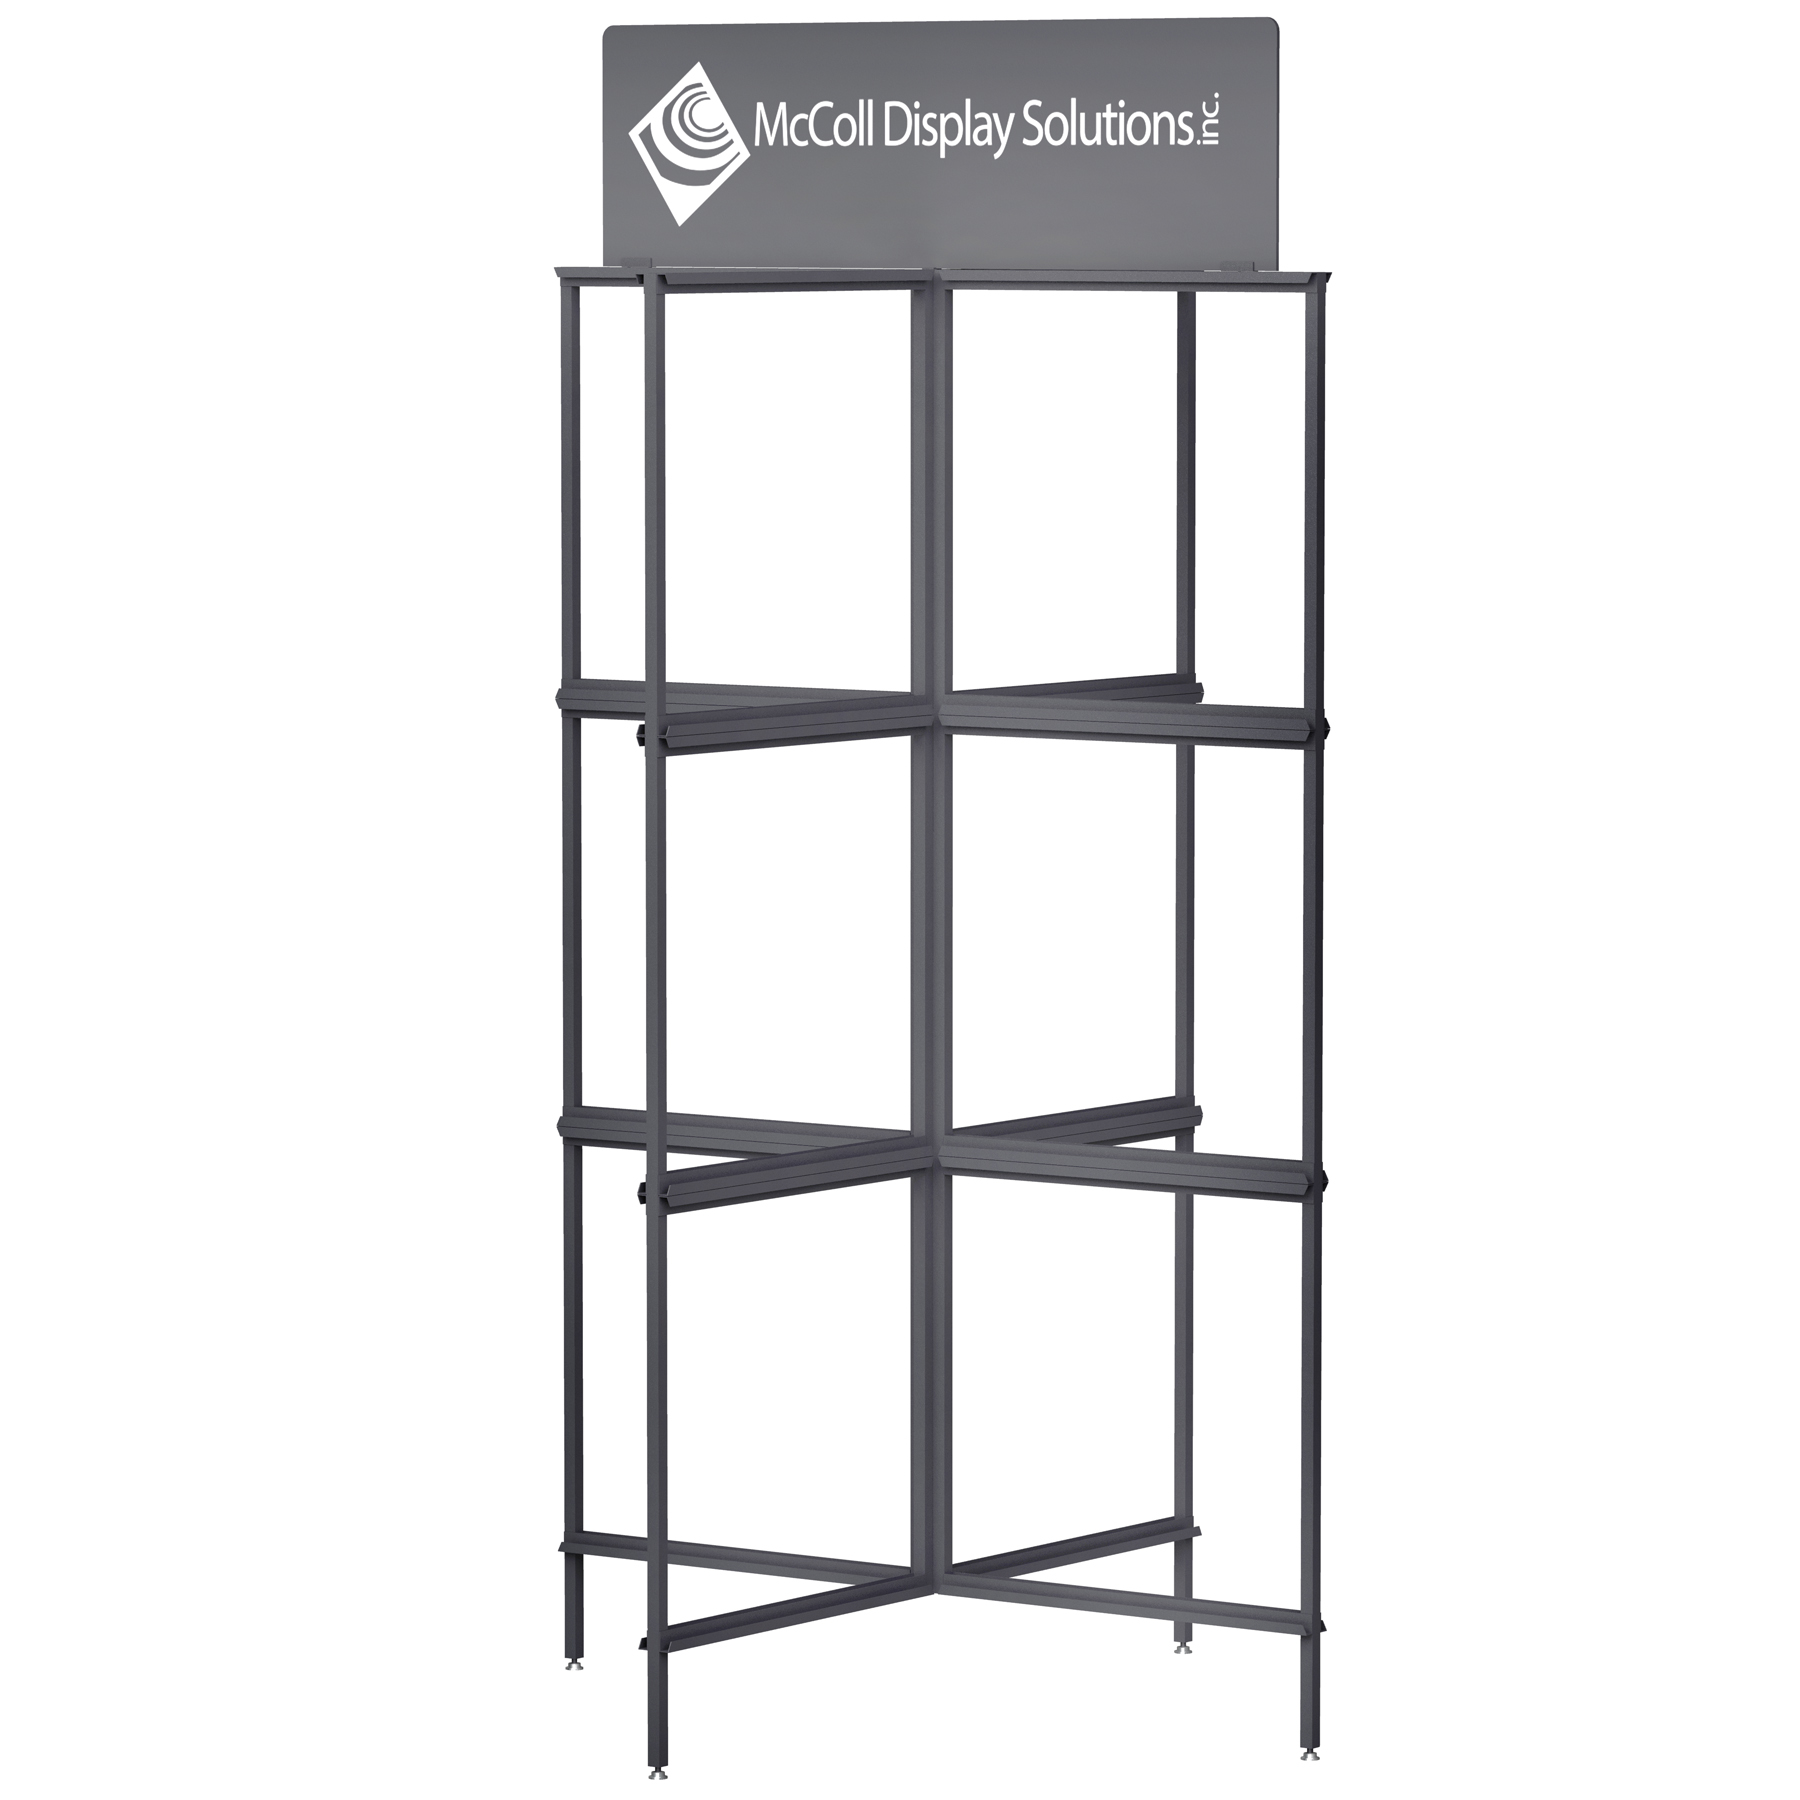 Durable Powder Coated Steel Tube Tower Channel System Display with Screen Print Company Logo